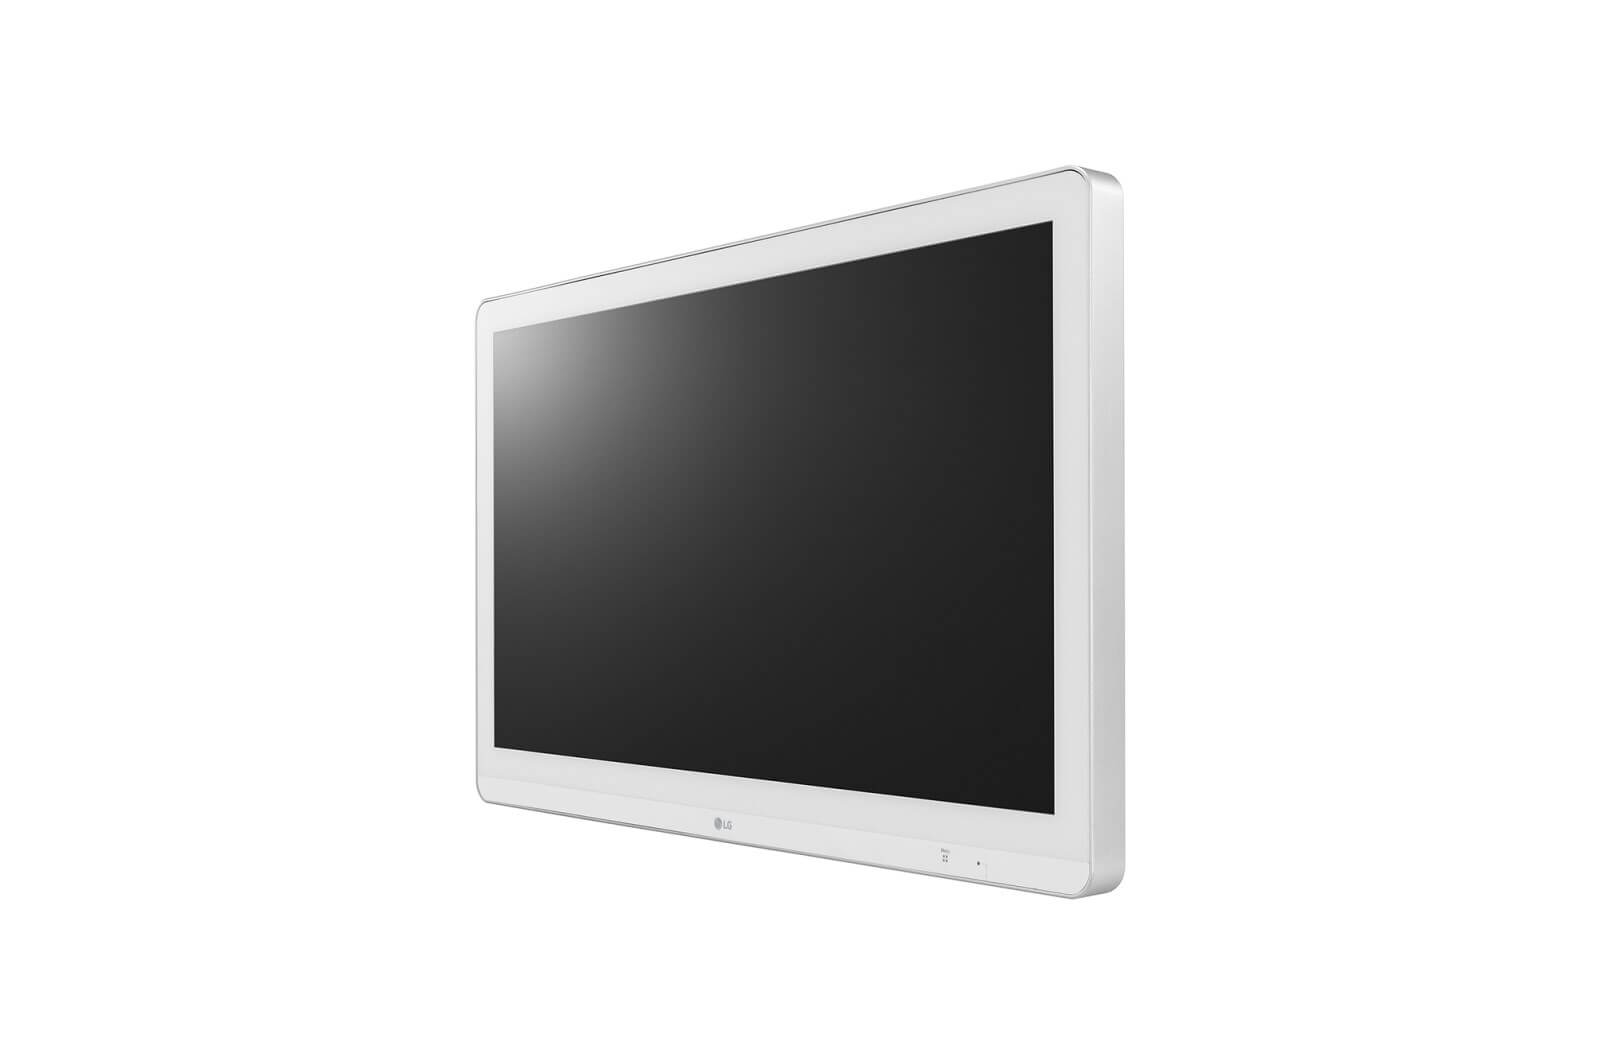 Medical display LG 27HK510S-W Surgical Monitor has a 27-inch Full HD IPS Display 